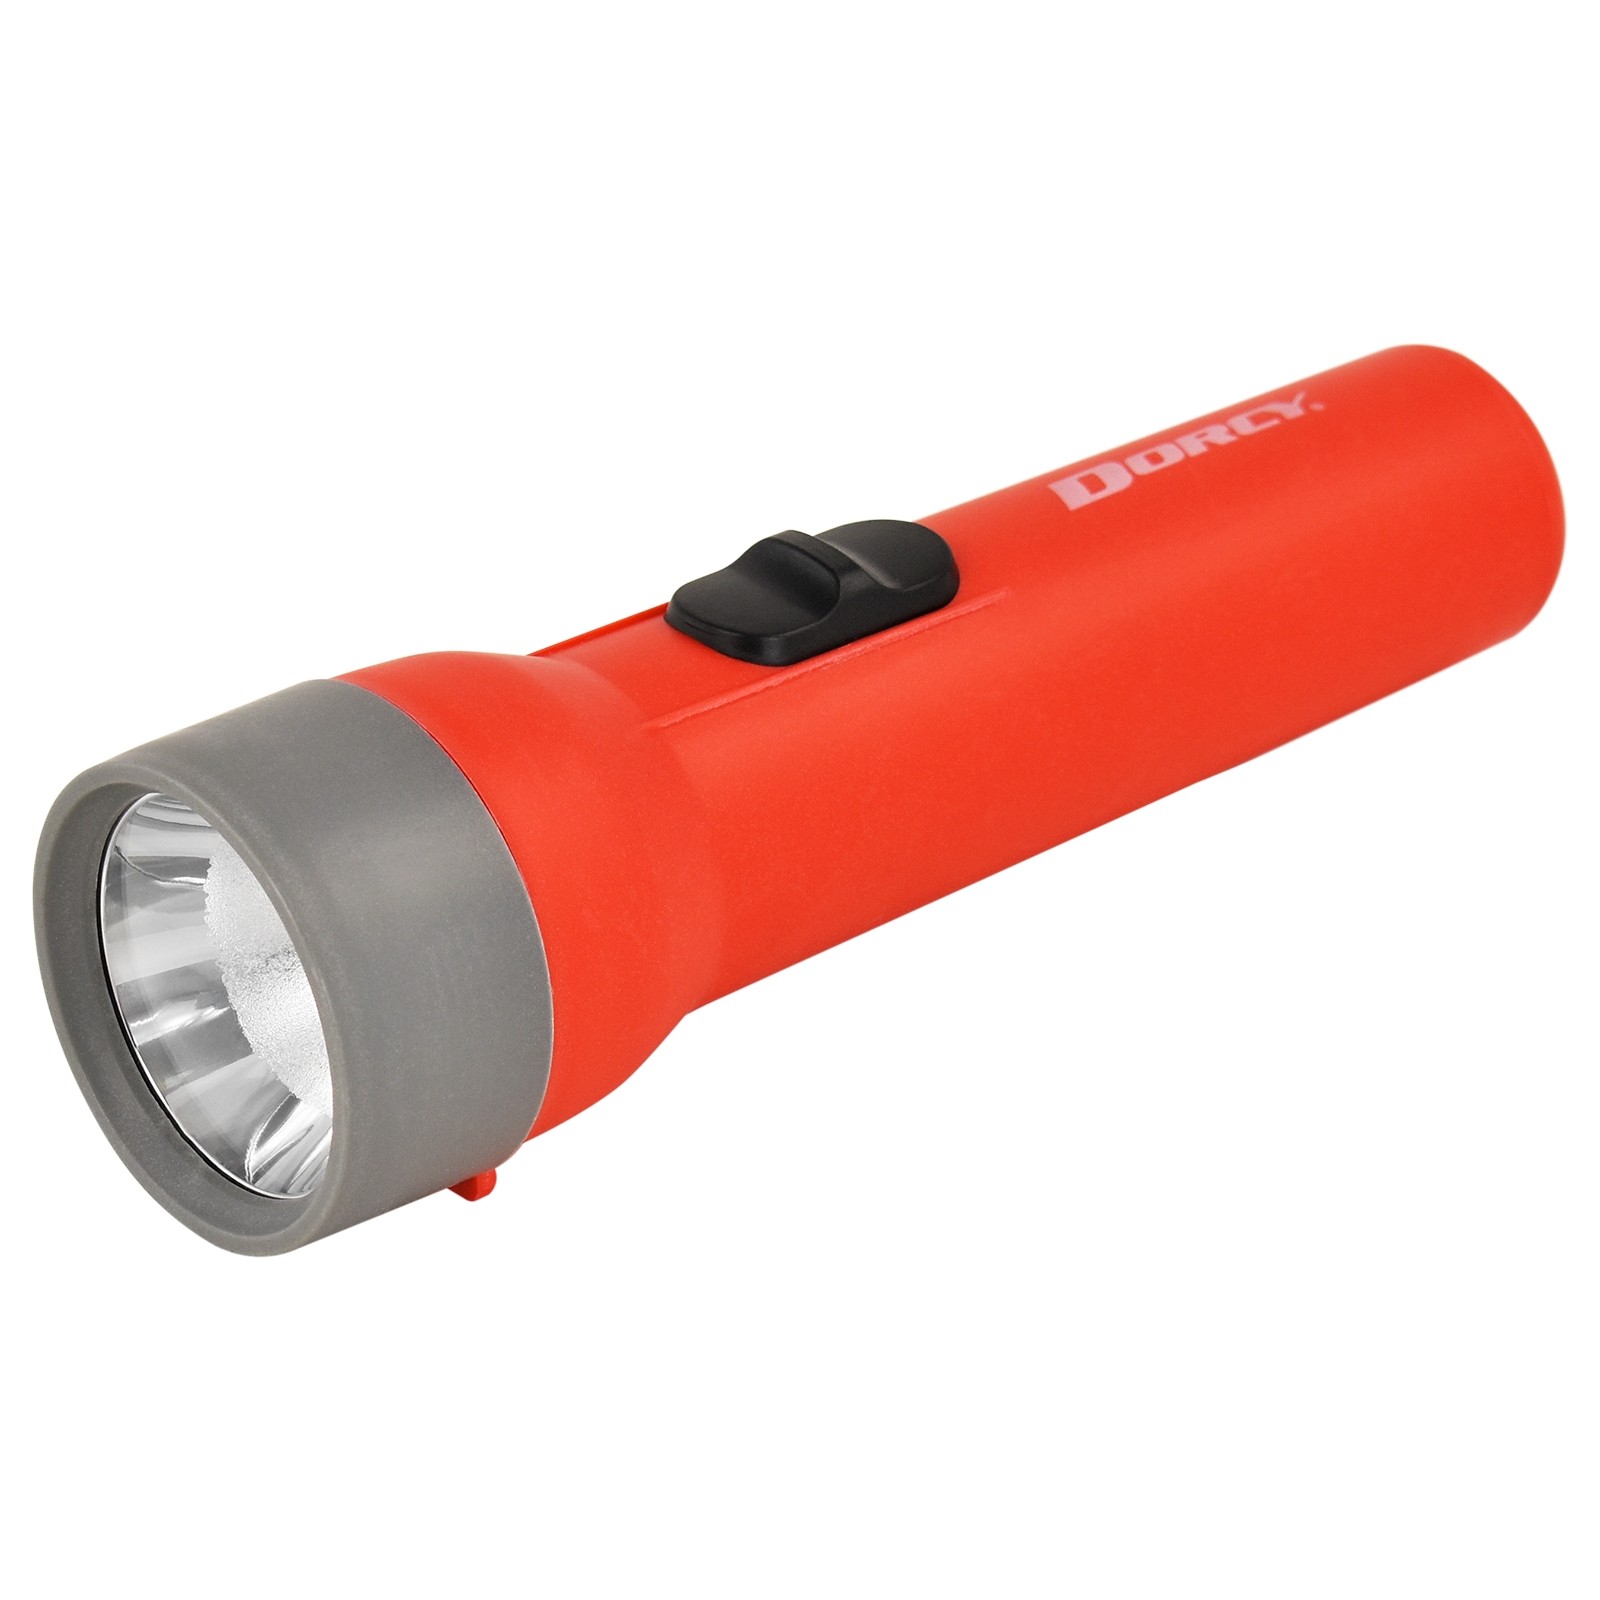 Dorcy 41-2461 Deluxe High Impact Resin LED Flashlight 25-Lumens,Assorted colors 